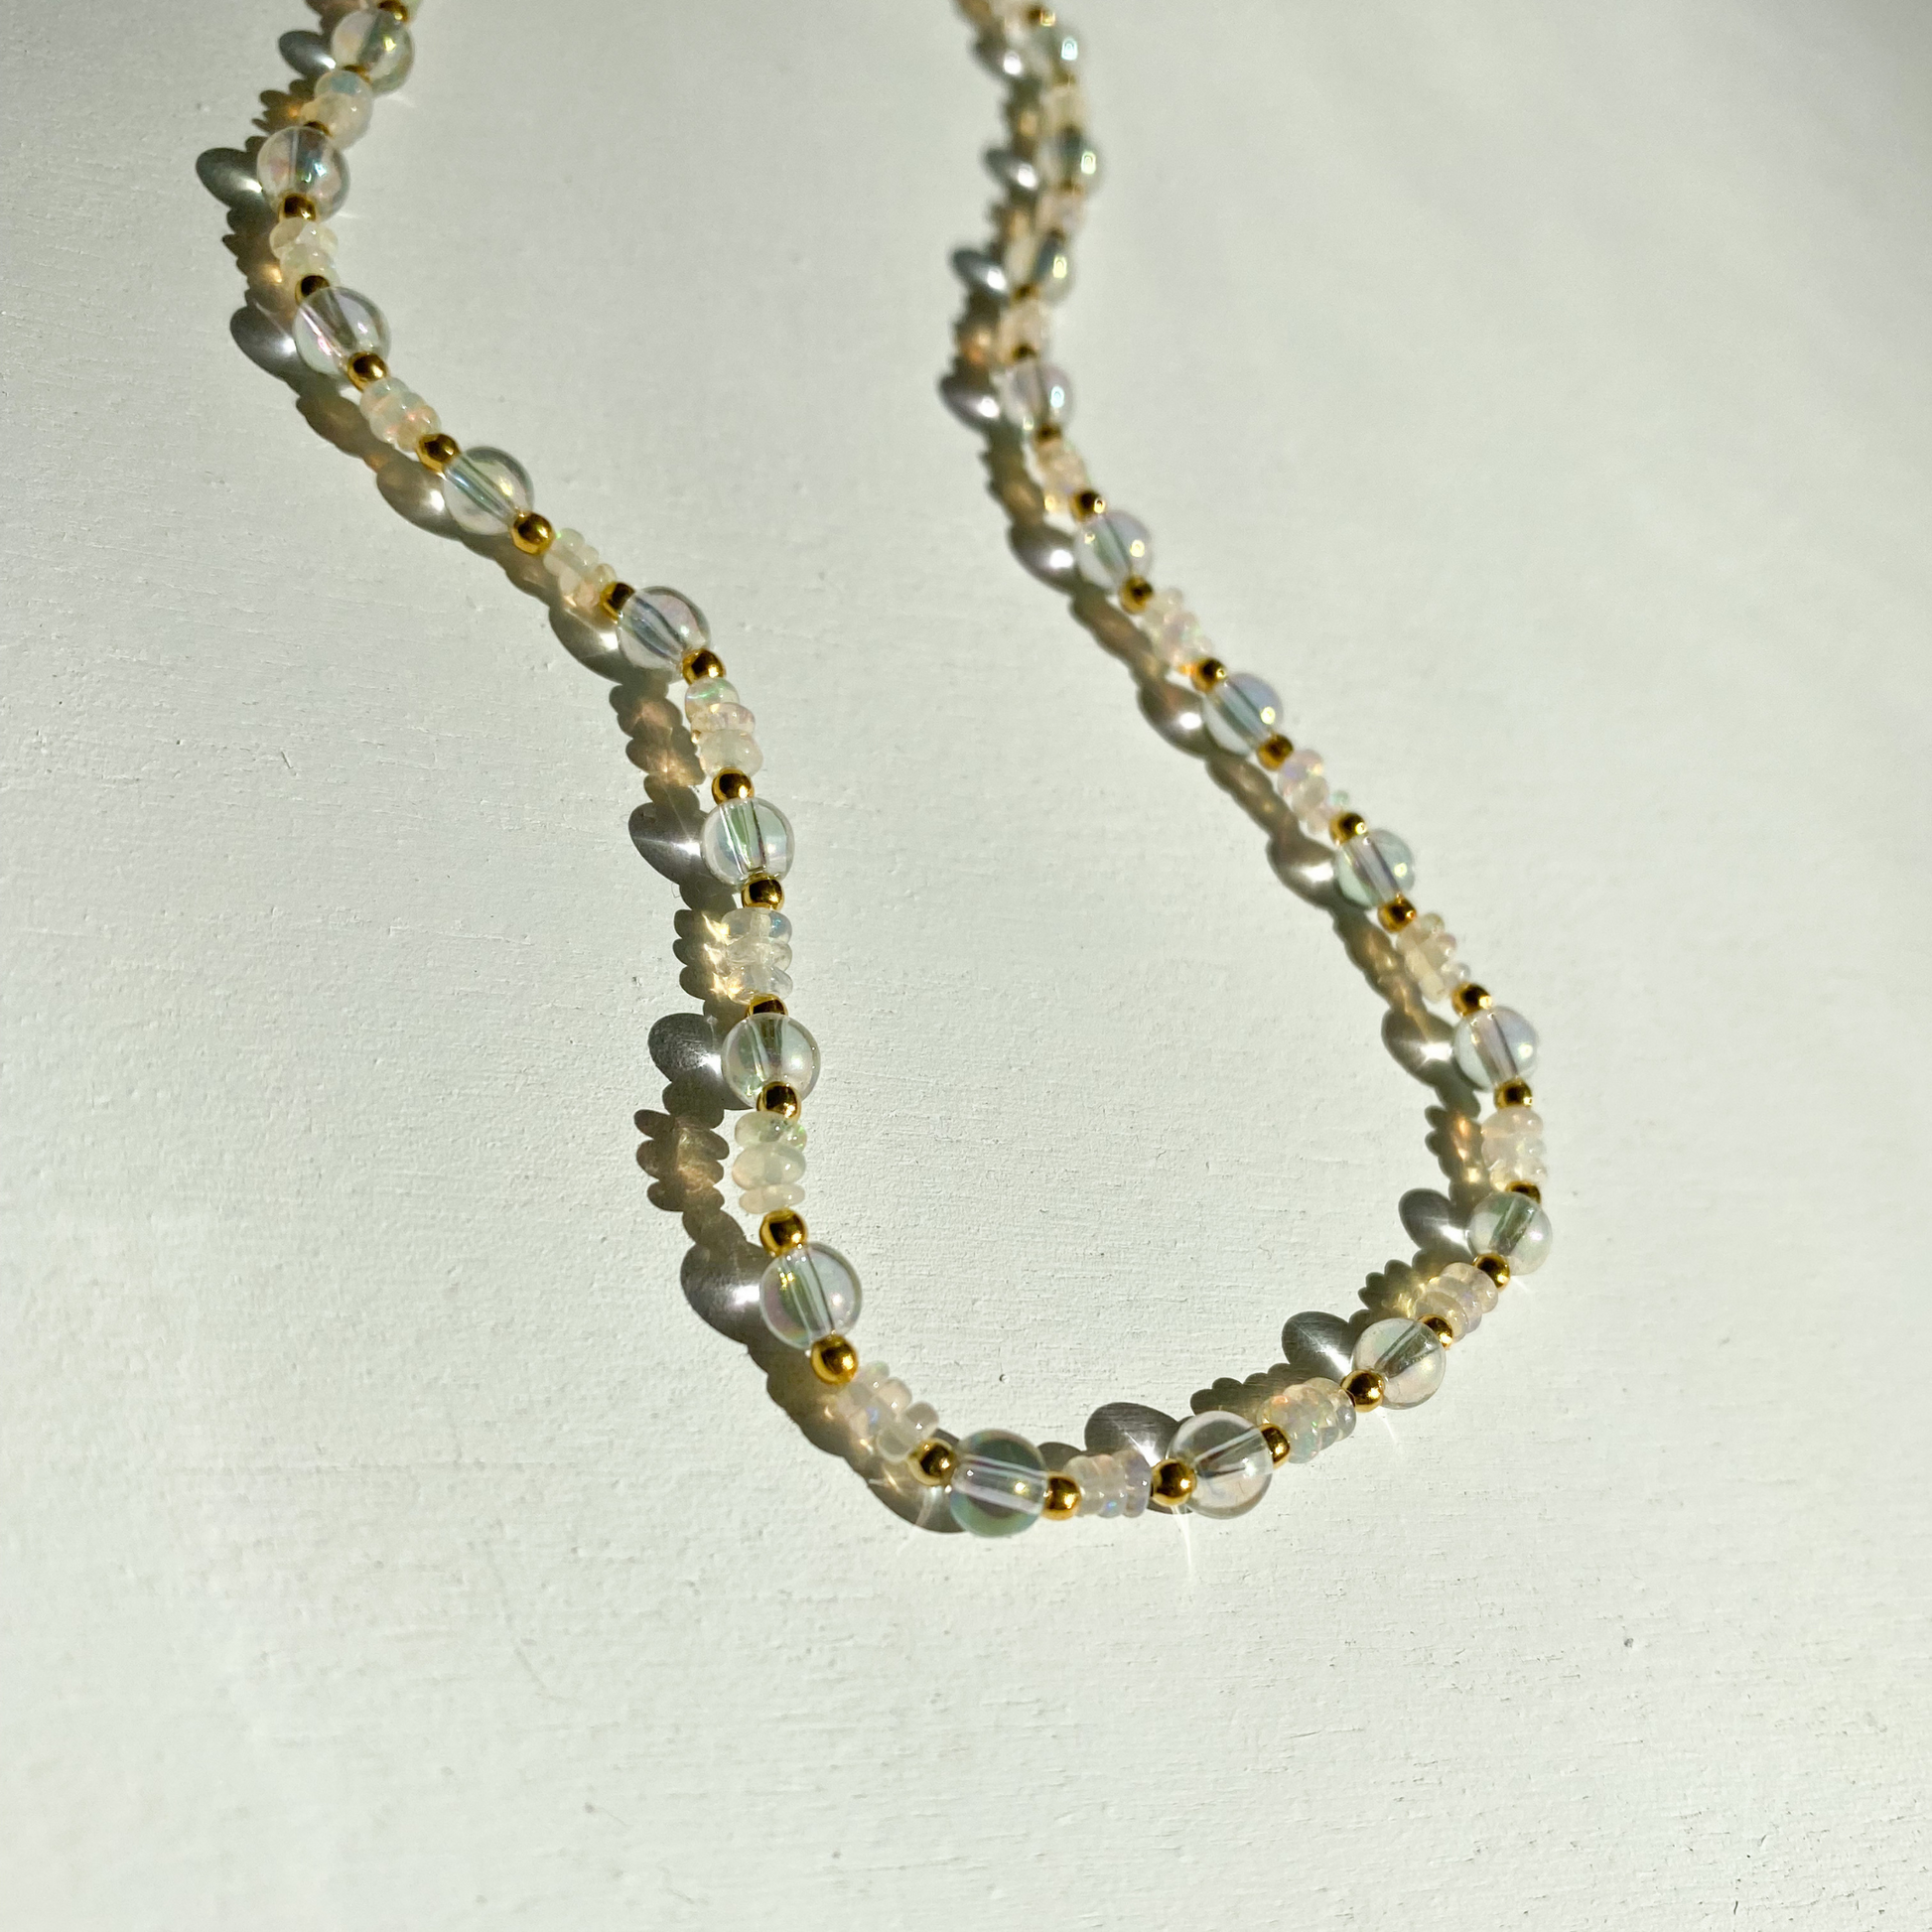 Roop jewelry opal glass necklace. Ethiopian opal and gold filled necklace. Unique jewelry in Oakland, Ca.